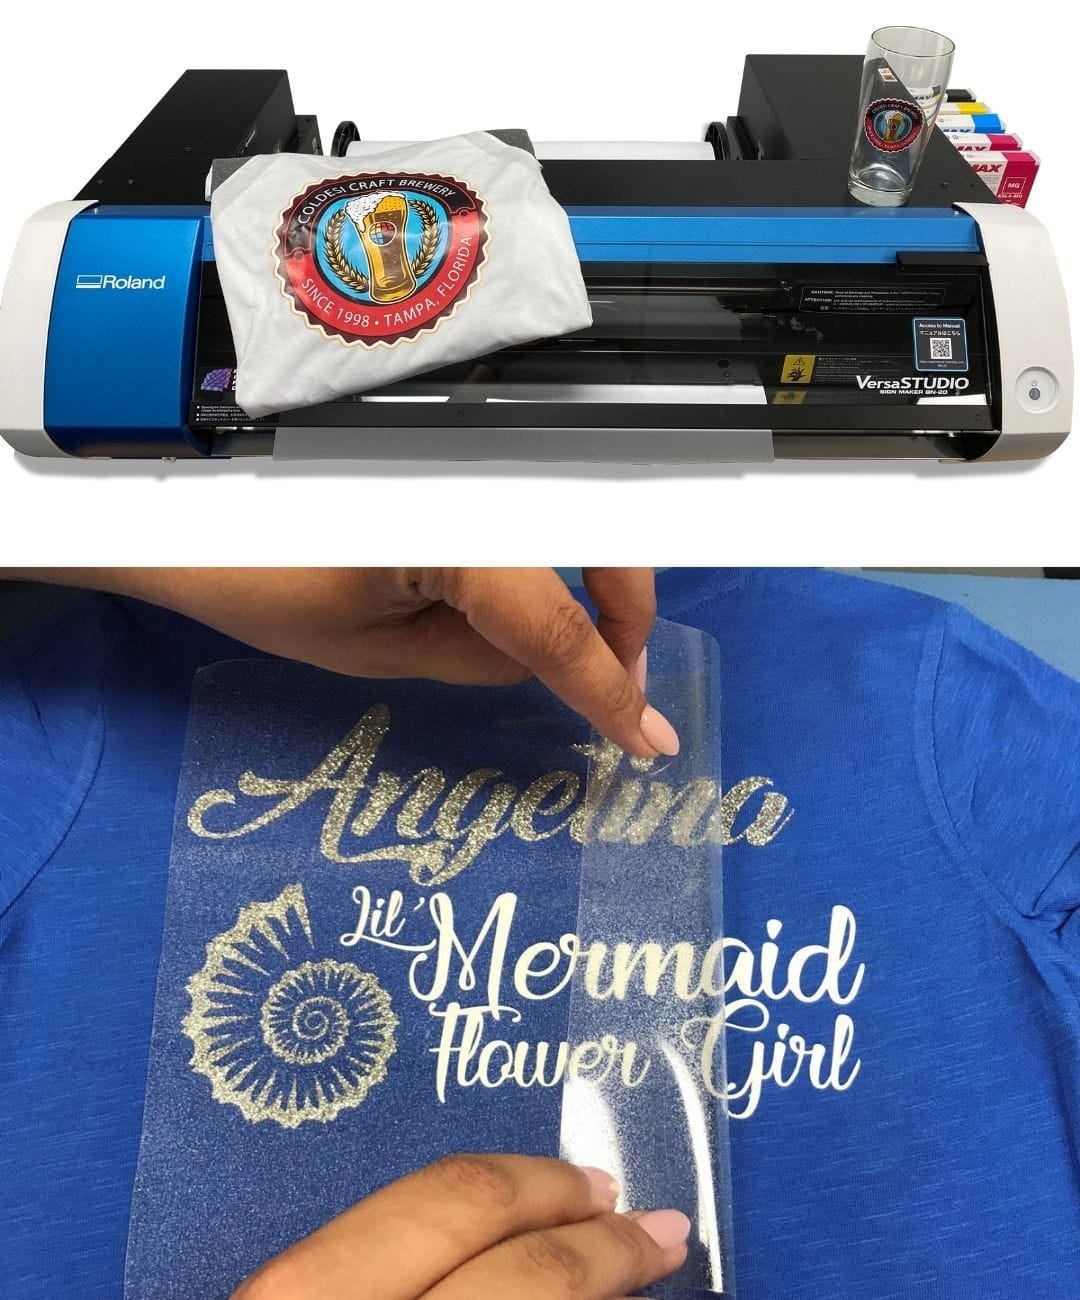 Printers for T Shirts What's the Best Type to Choose? - Printer Machine